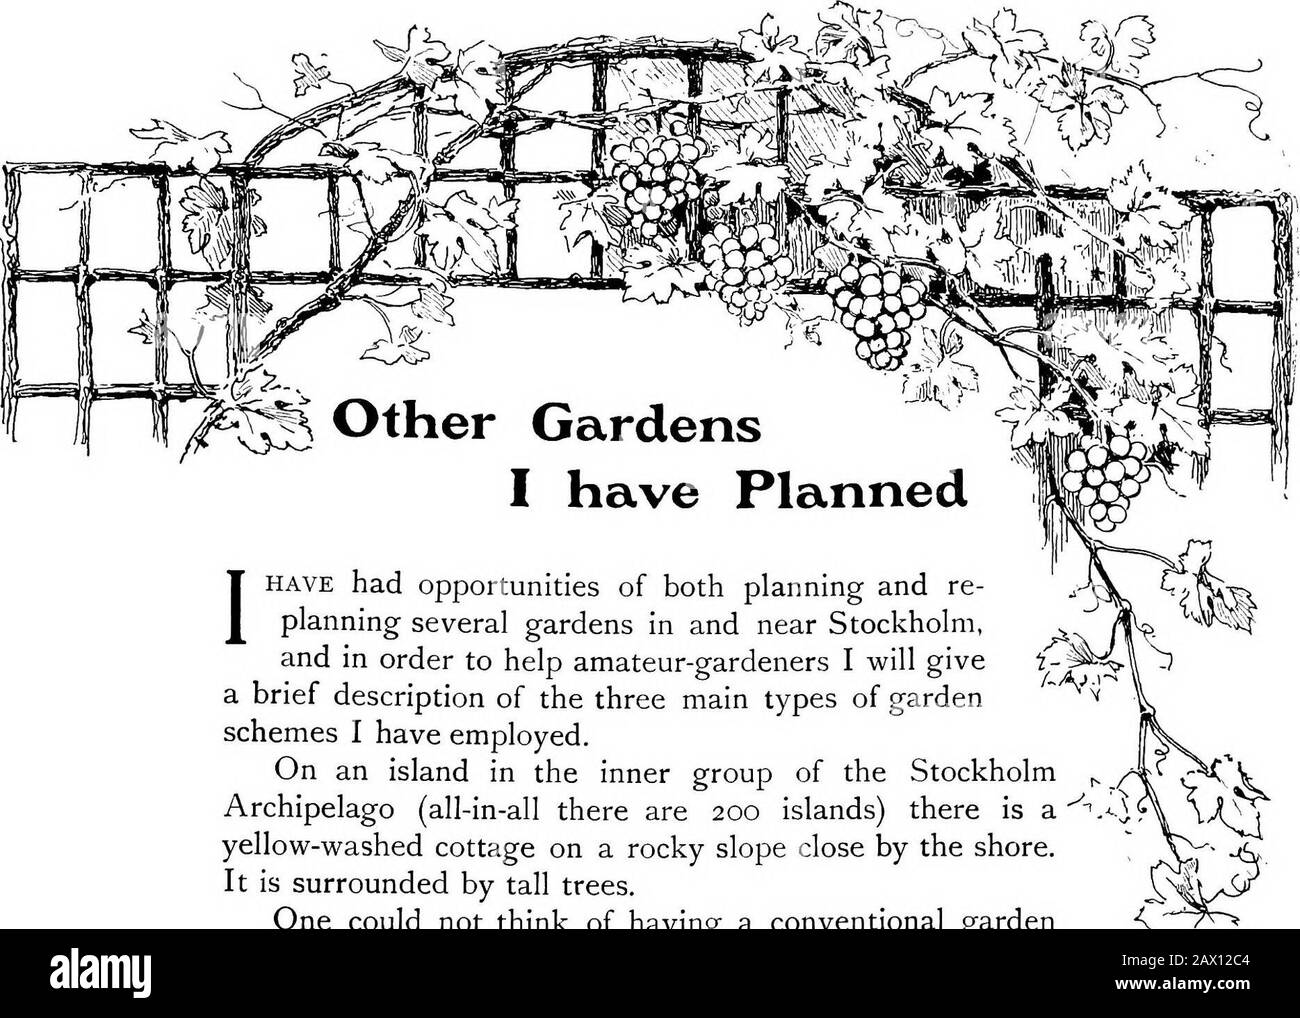 The garden that we made . Digitized br Mil Digitized by IVIicrosoft®. The Flower Borders inthe Garden of MixedFlowers. 1HAVE had opportunities of both planning and re-planning several gardens in and near Stockholm,and in order to help amateur-gardeners I will givea brief description of the three main types of gardenschemes I have employed. On an island in the inner group of the StockholmArchipelago (all-in-all there are 200 islands) there is ayellow-washed cottage on a rocky slope close by the shore.It is surrounded by tall trees. One could not think of having a conventional gardenhere, where Stock Photo